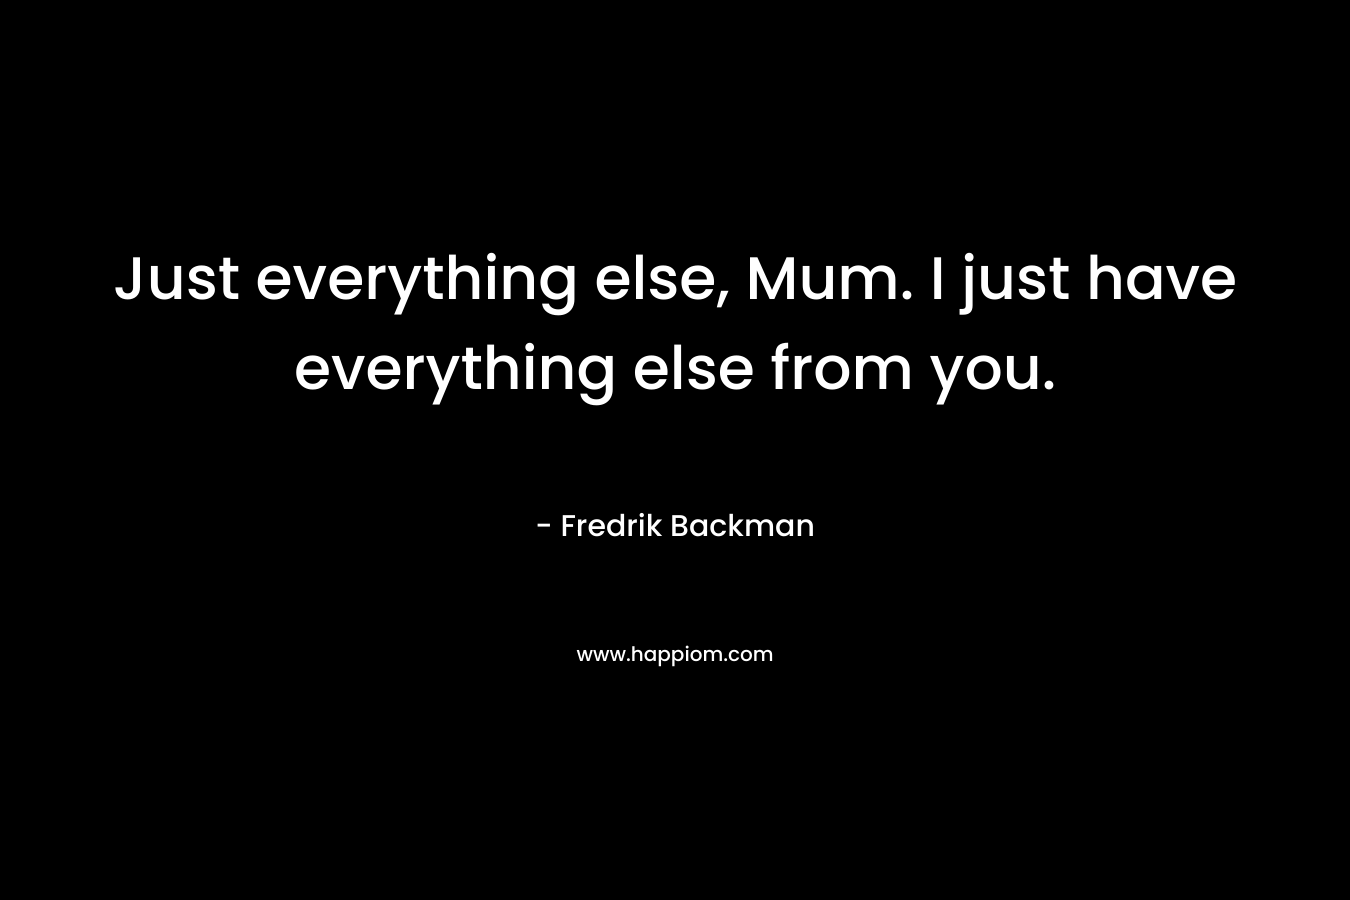 Just everything else, Mum. I just have everything else from you. – Fredrik Backman